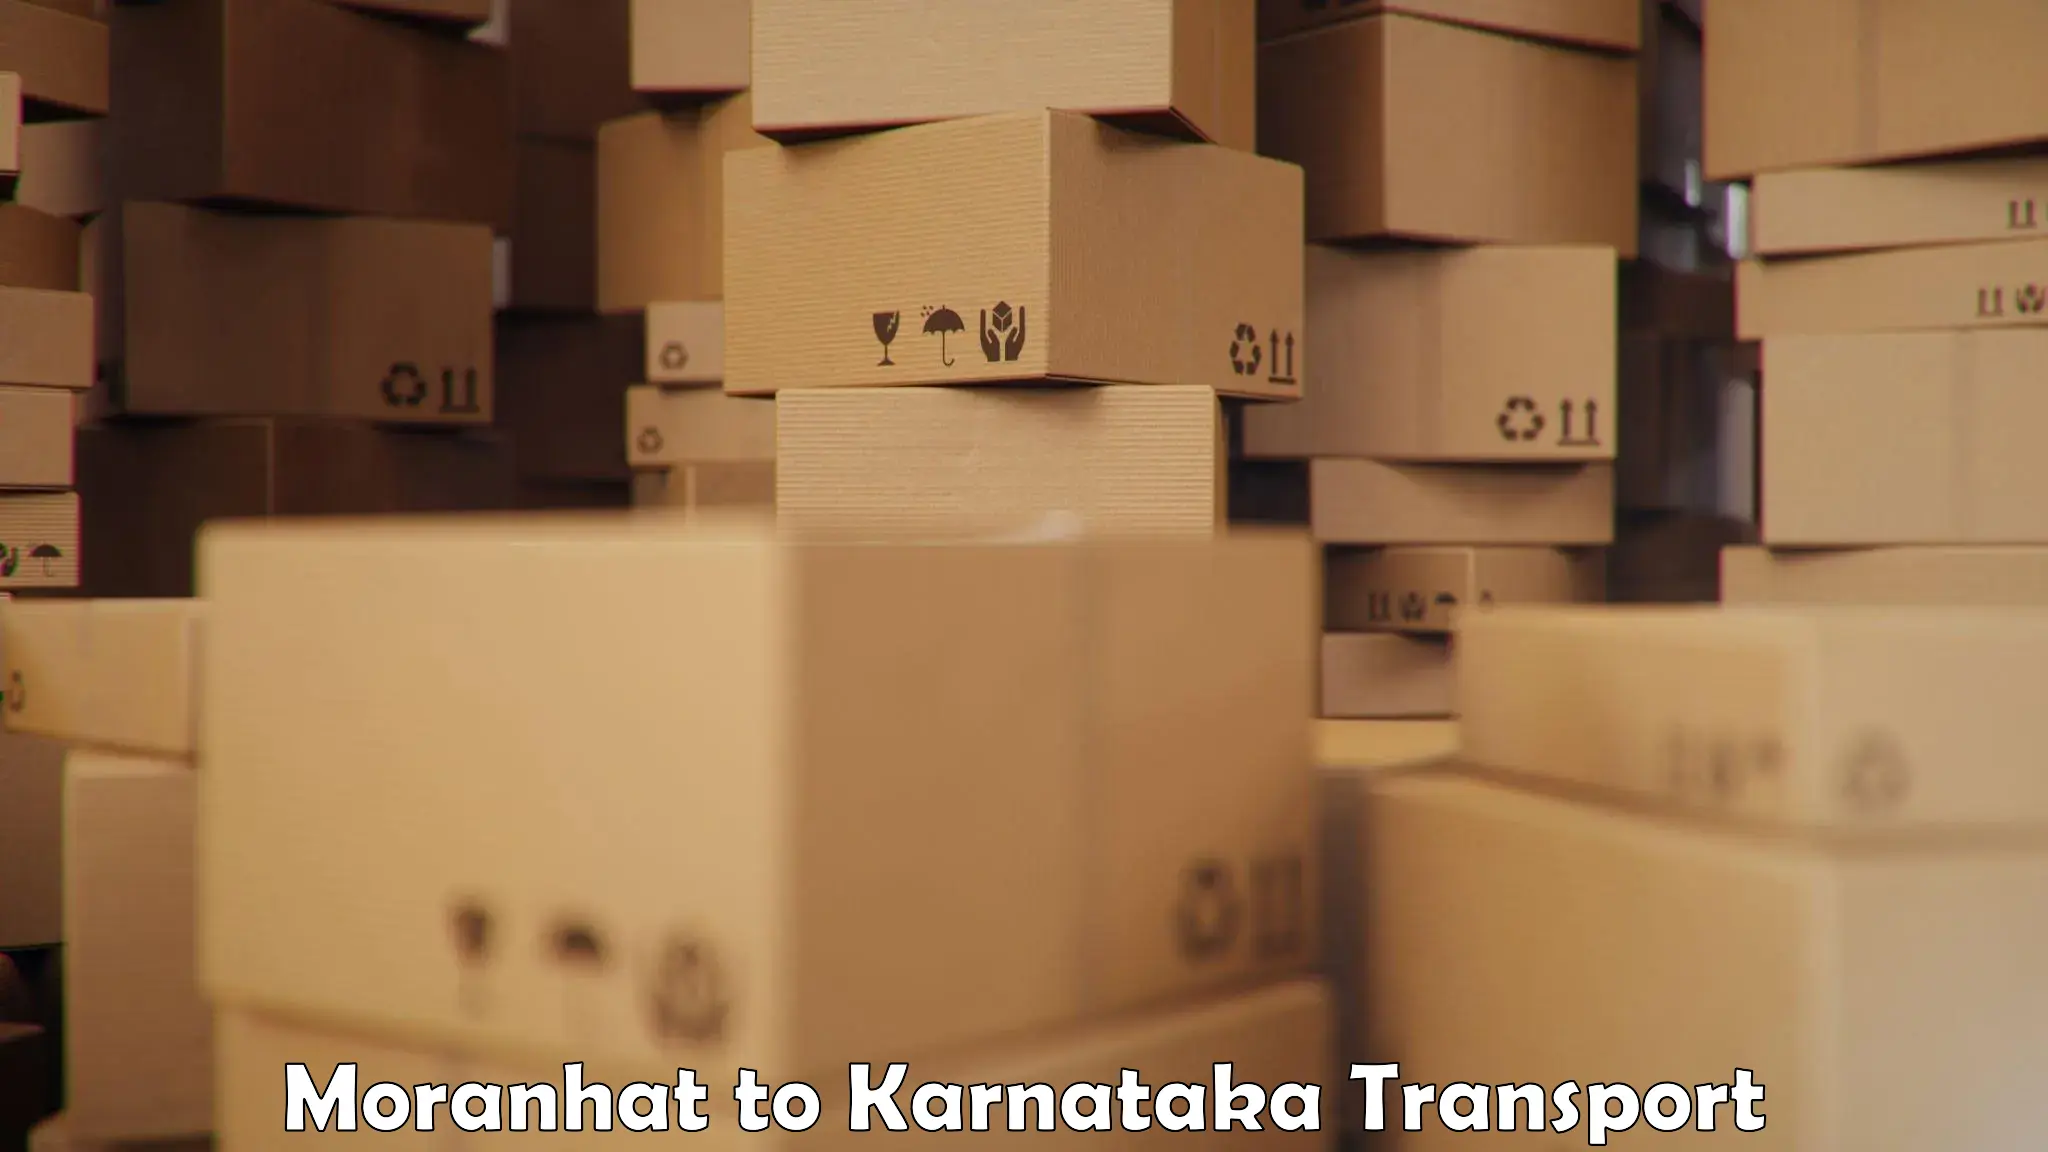 Container transport service Moranhat to Bantwal